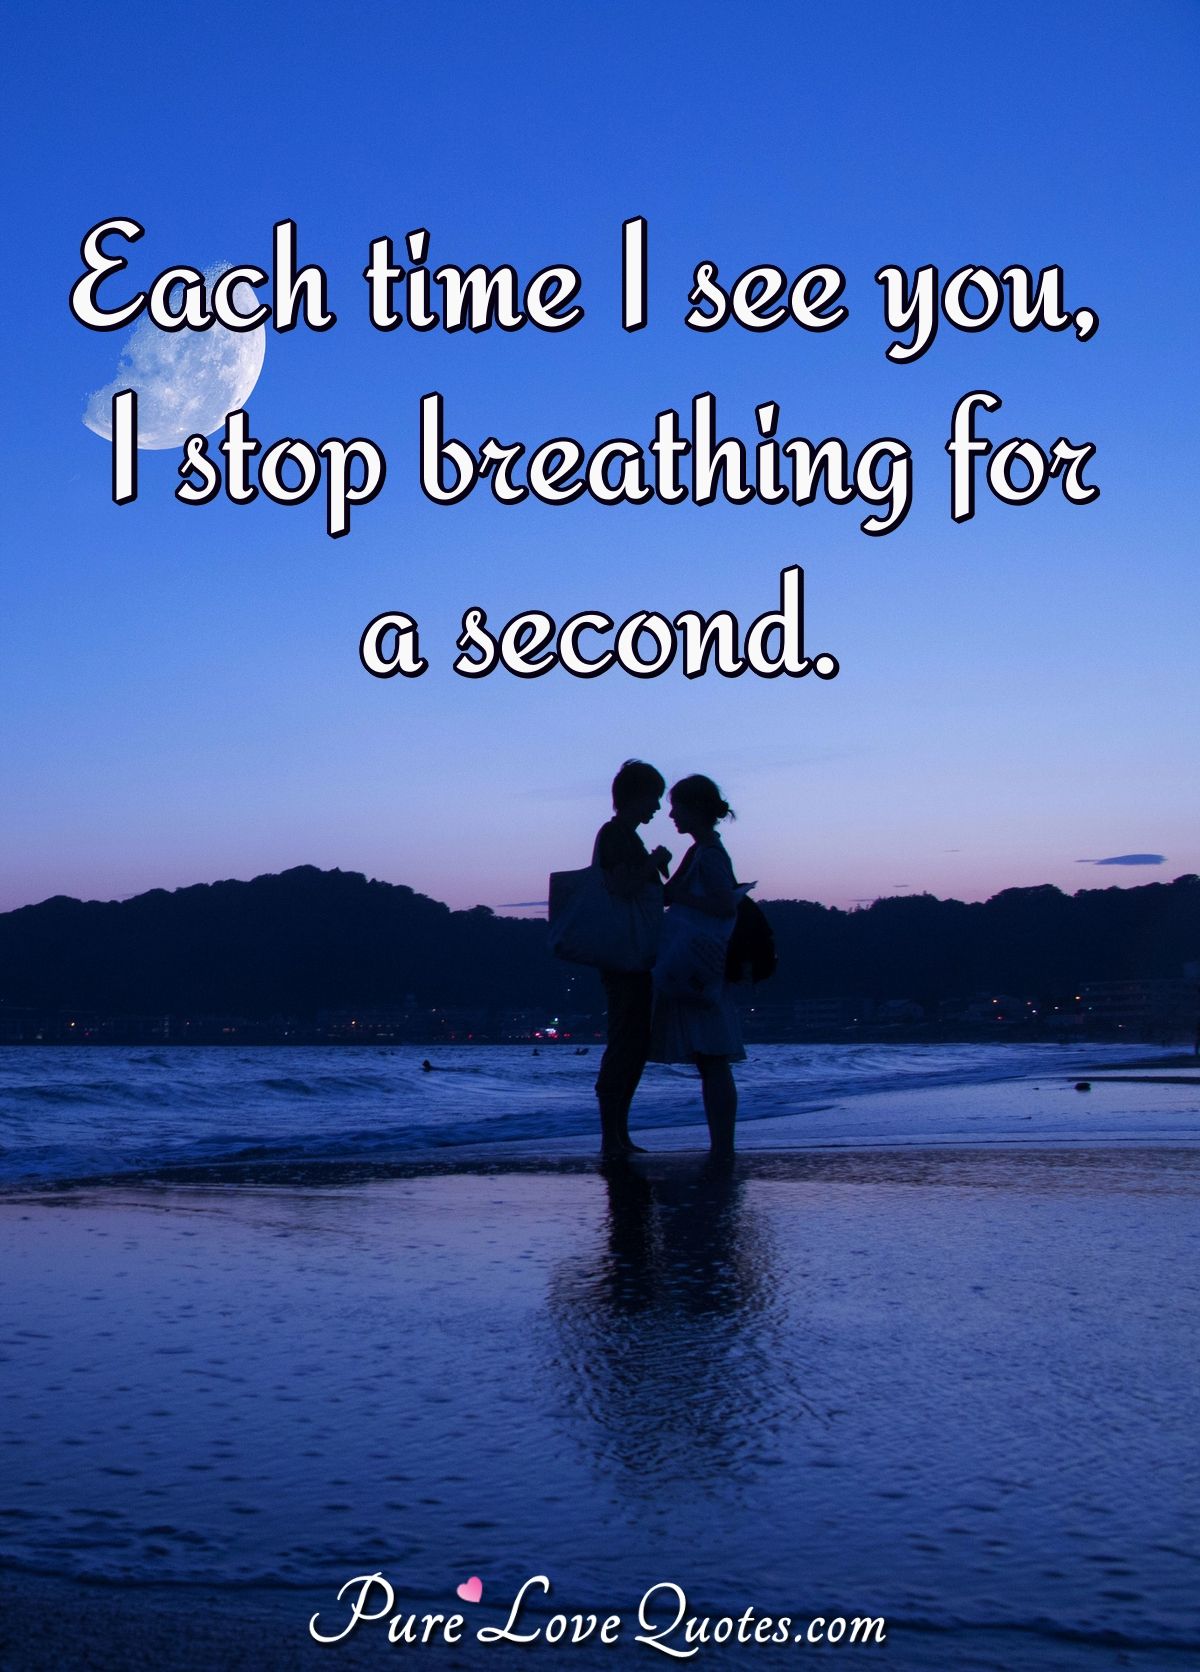 Each time I see you, I stop breathing for a second. - Anonymous